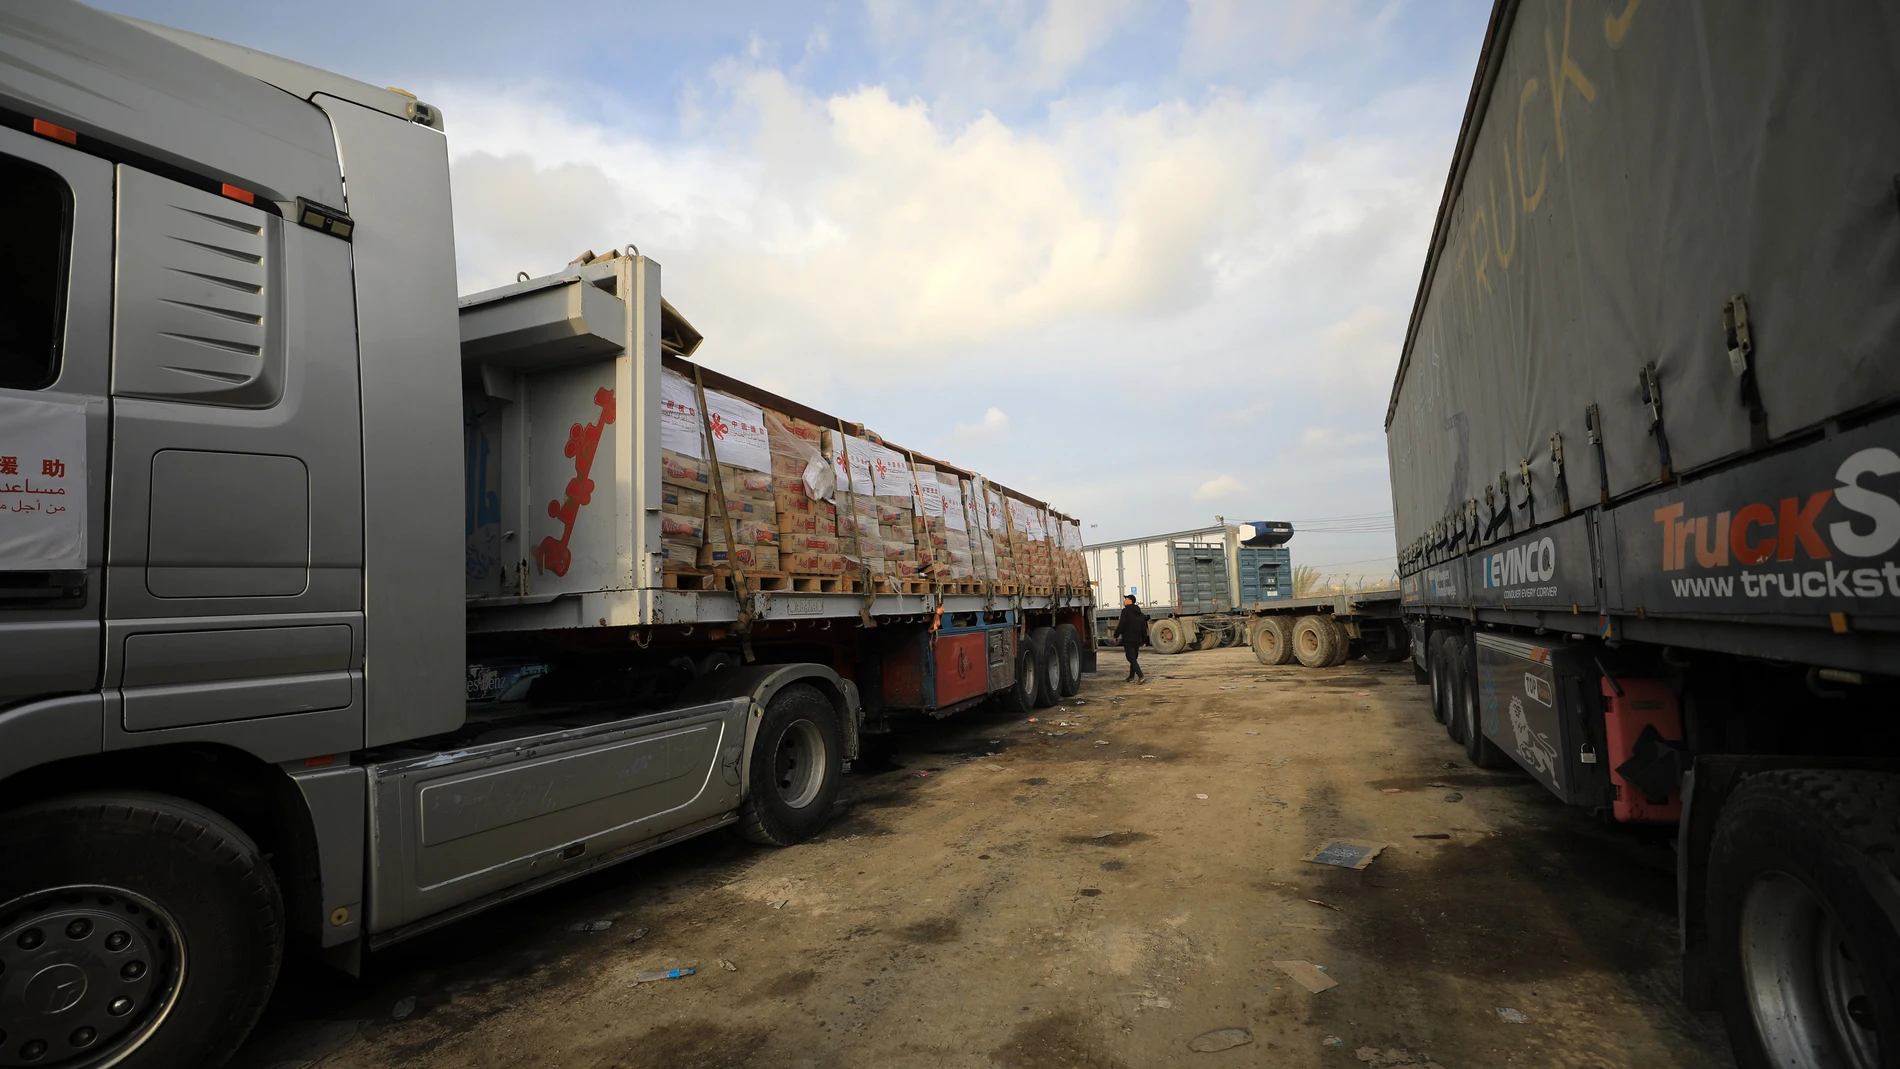 GAZA, Dec. 18, 2023 -- A truck loaded with humanitarian aid supplies provided by China is seen on the Gaza side of the Kerem Shalom border crossing between Israel and the Gaza Strip, Dec. 17, 2023. (Foto de ARCHIVO) 17/12/2023